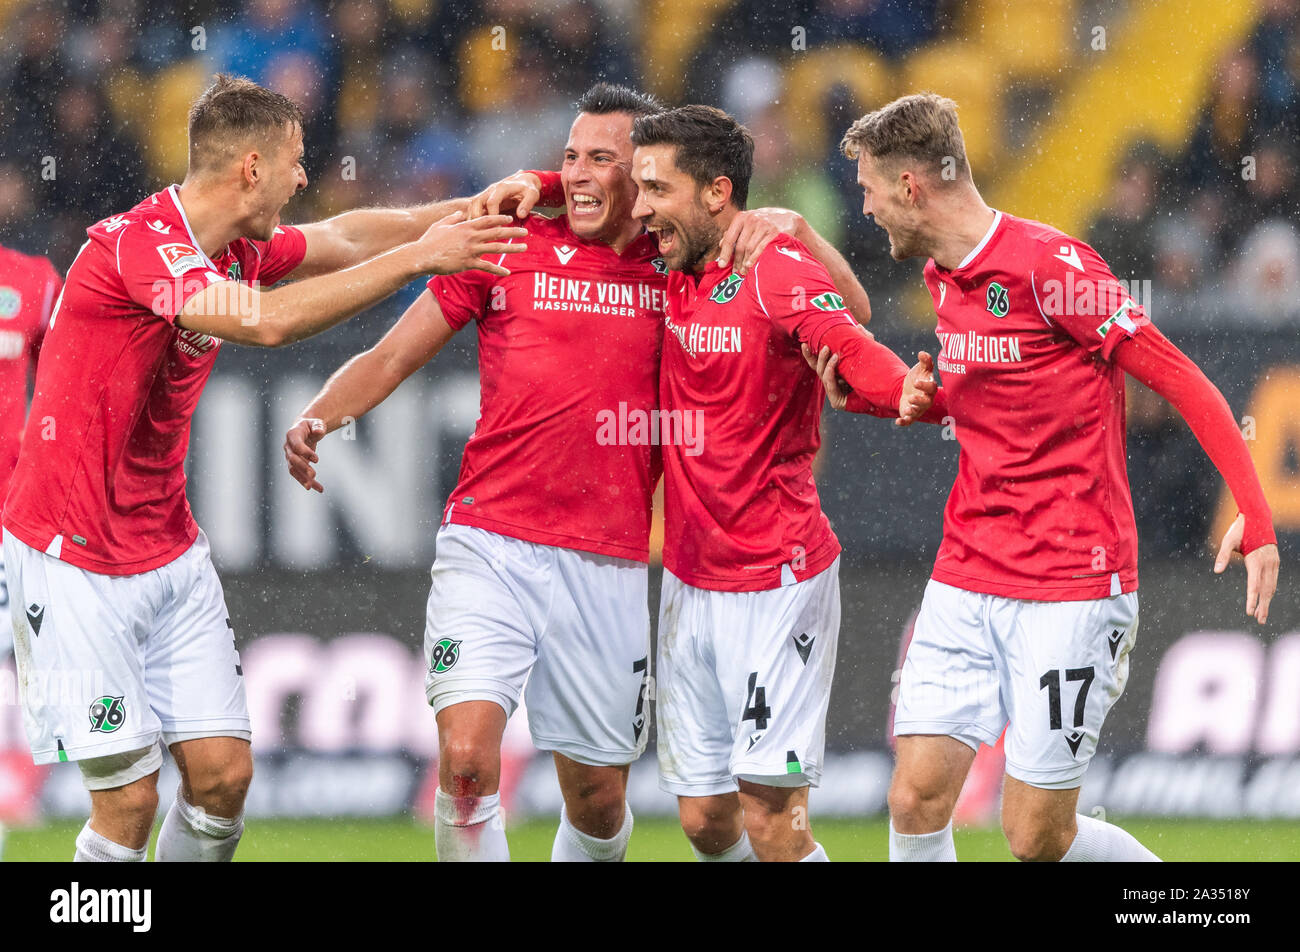 05 October 2019, Saxony, Dresden: Soccer: 2nd Bundesliga, Dynamo Dresden - Hannover 96, Matchday 9, in the Rudolf Harbig Stadium. Hannovers Julian Korb (2nd from right) cheers after his goal to 0:1 with his teammates Miiko Albornoz (l-r), Edgar Prib and Marvin Ducksch. Photo: Robert Michael/dpa-Zentralbild/dpa - IMPORTANT NOTE: In accordance with the requirements of the DFL Deutsche Fußball Liga or the DFB Deutscher Fußball-Bund, it is prohibited to use or have used photographs taken in the stadium and/or the match in the form of sequence images and/or video-like photo sequences. Stock Photo